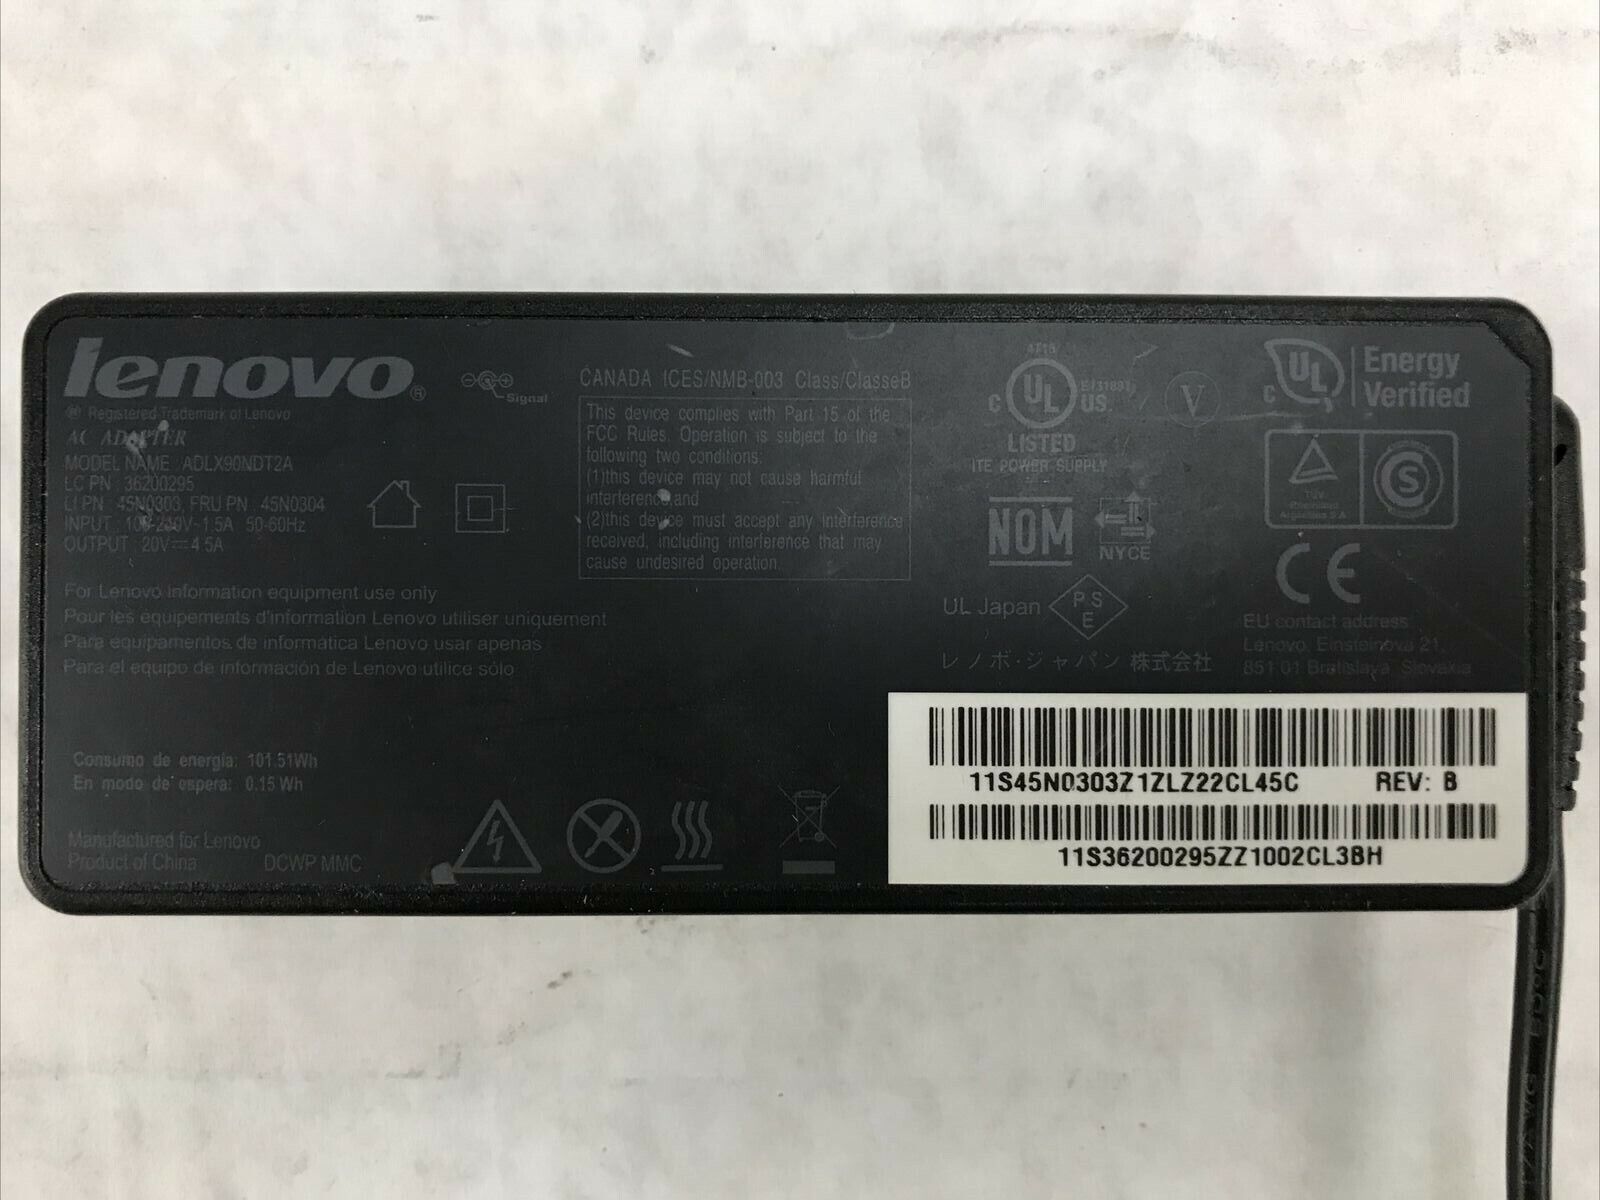 Lenovo Round-tip 90W Laptop Power Adapter ADLX90NDT2A 20V 4.5A